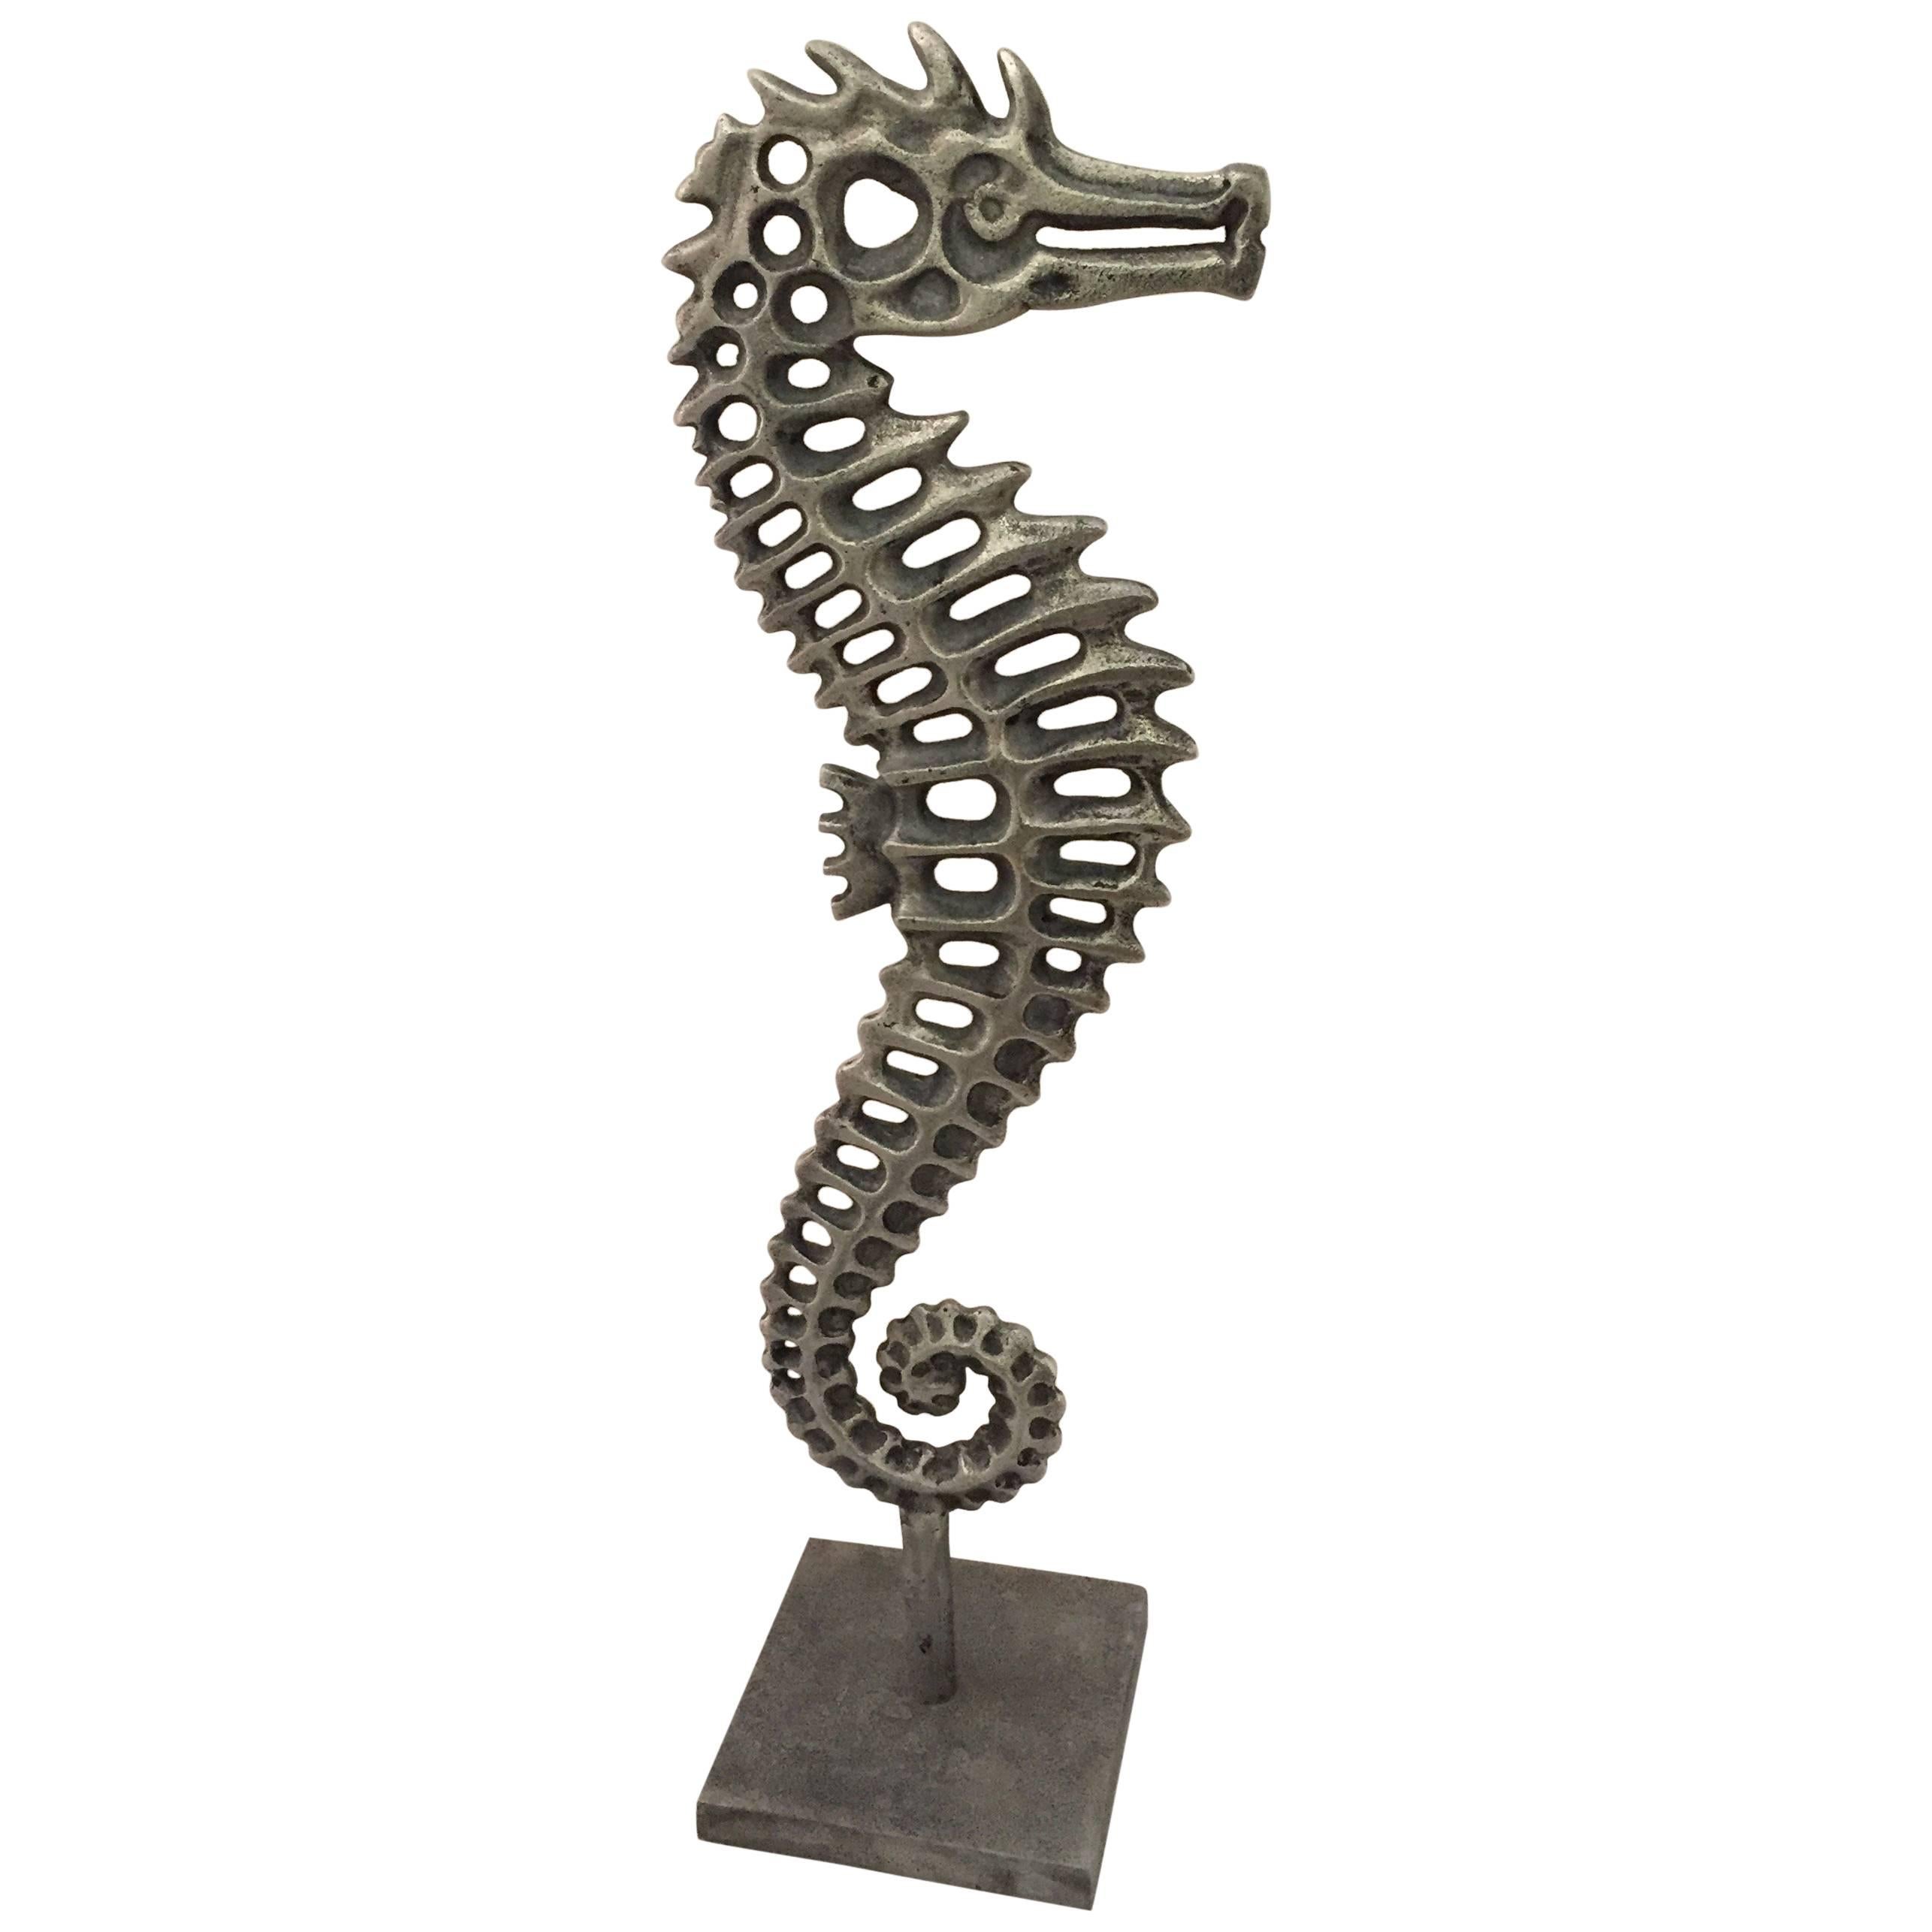 1970s Cast Aluminum Seahorse in the Manner of Don Drumm